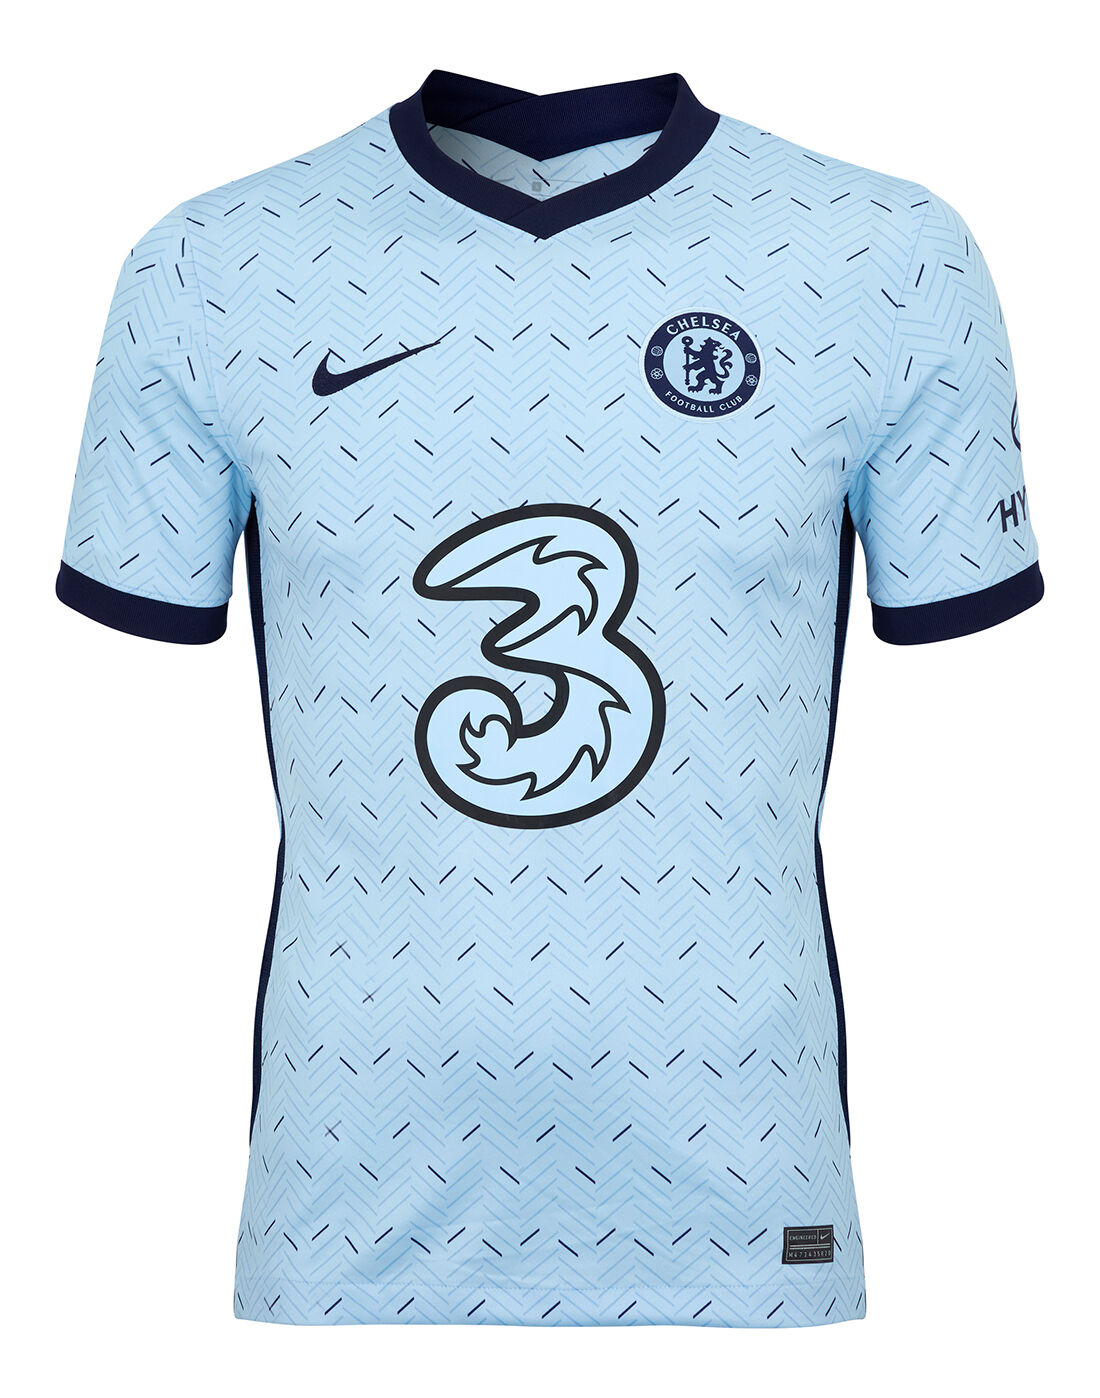 chelsea fc white jersey